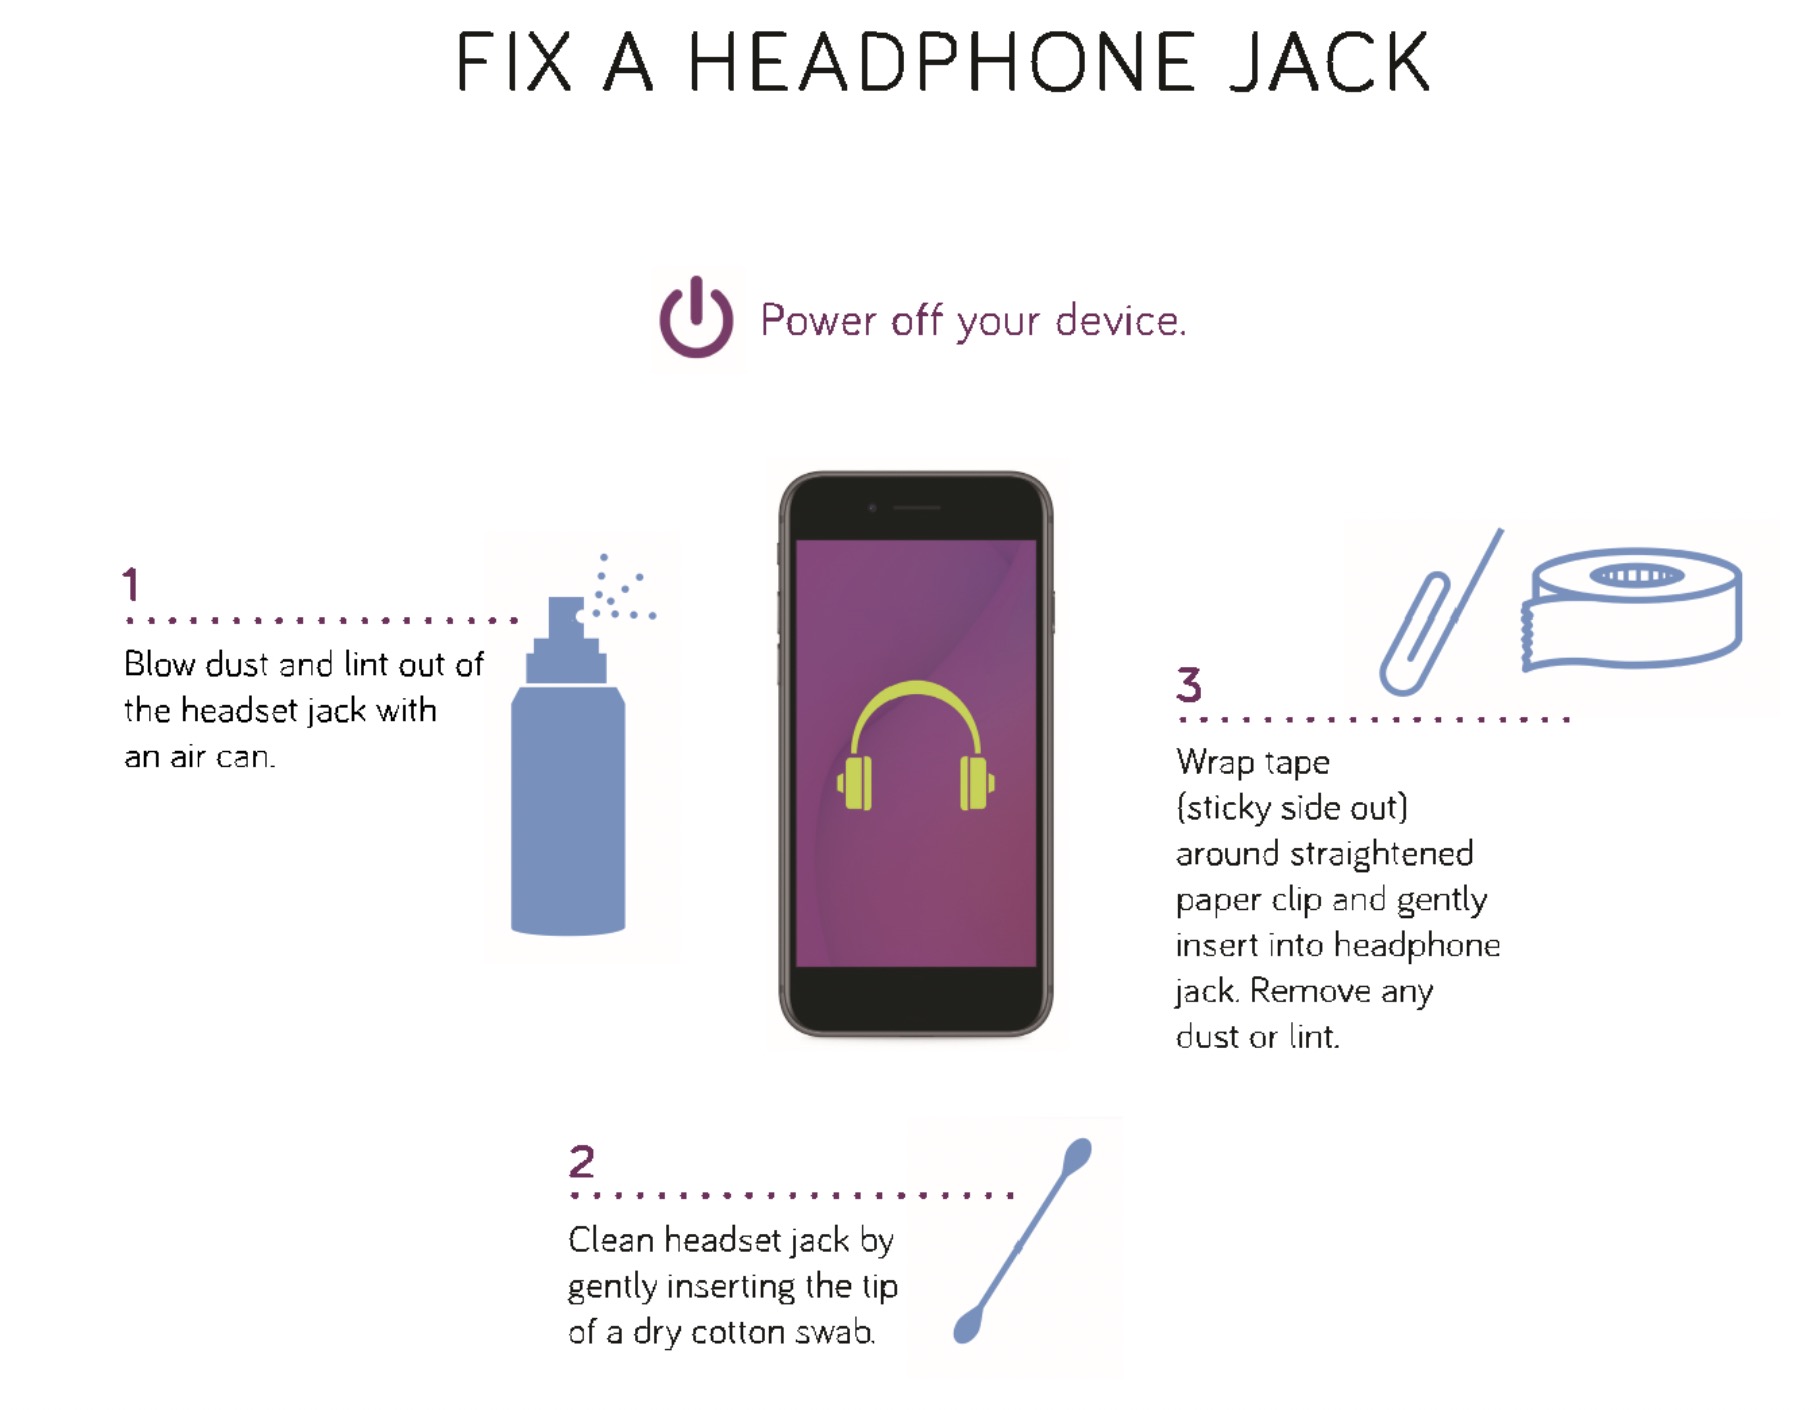 Can I clean headphone jack with alcohol